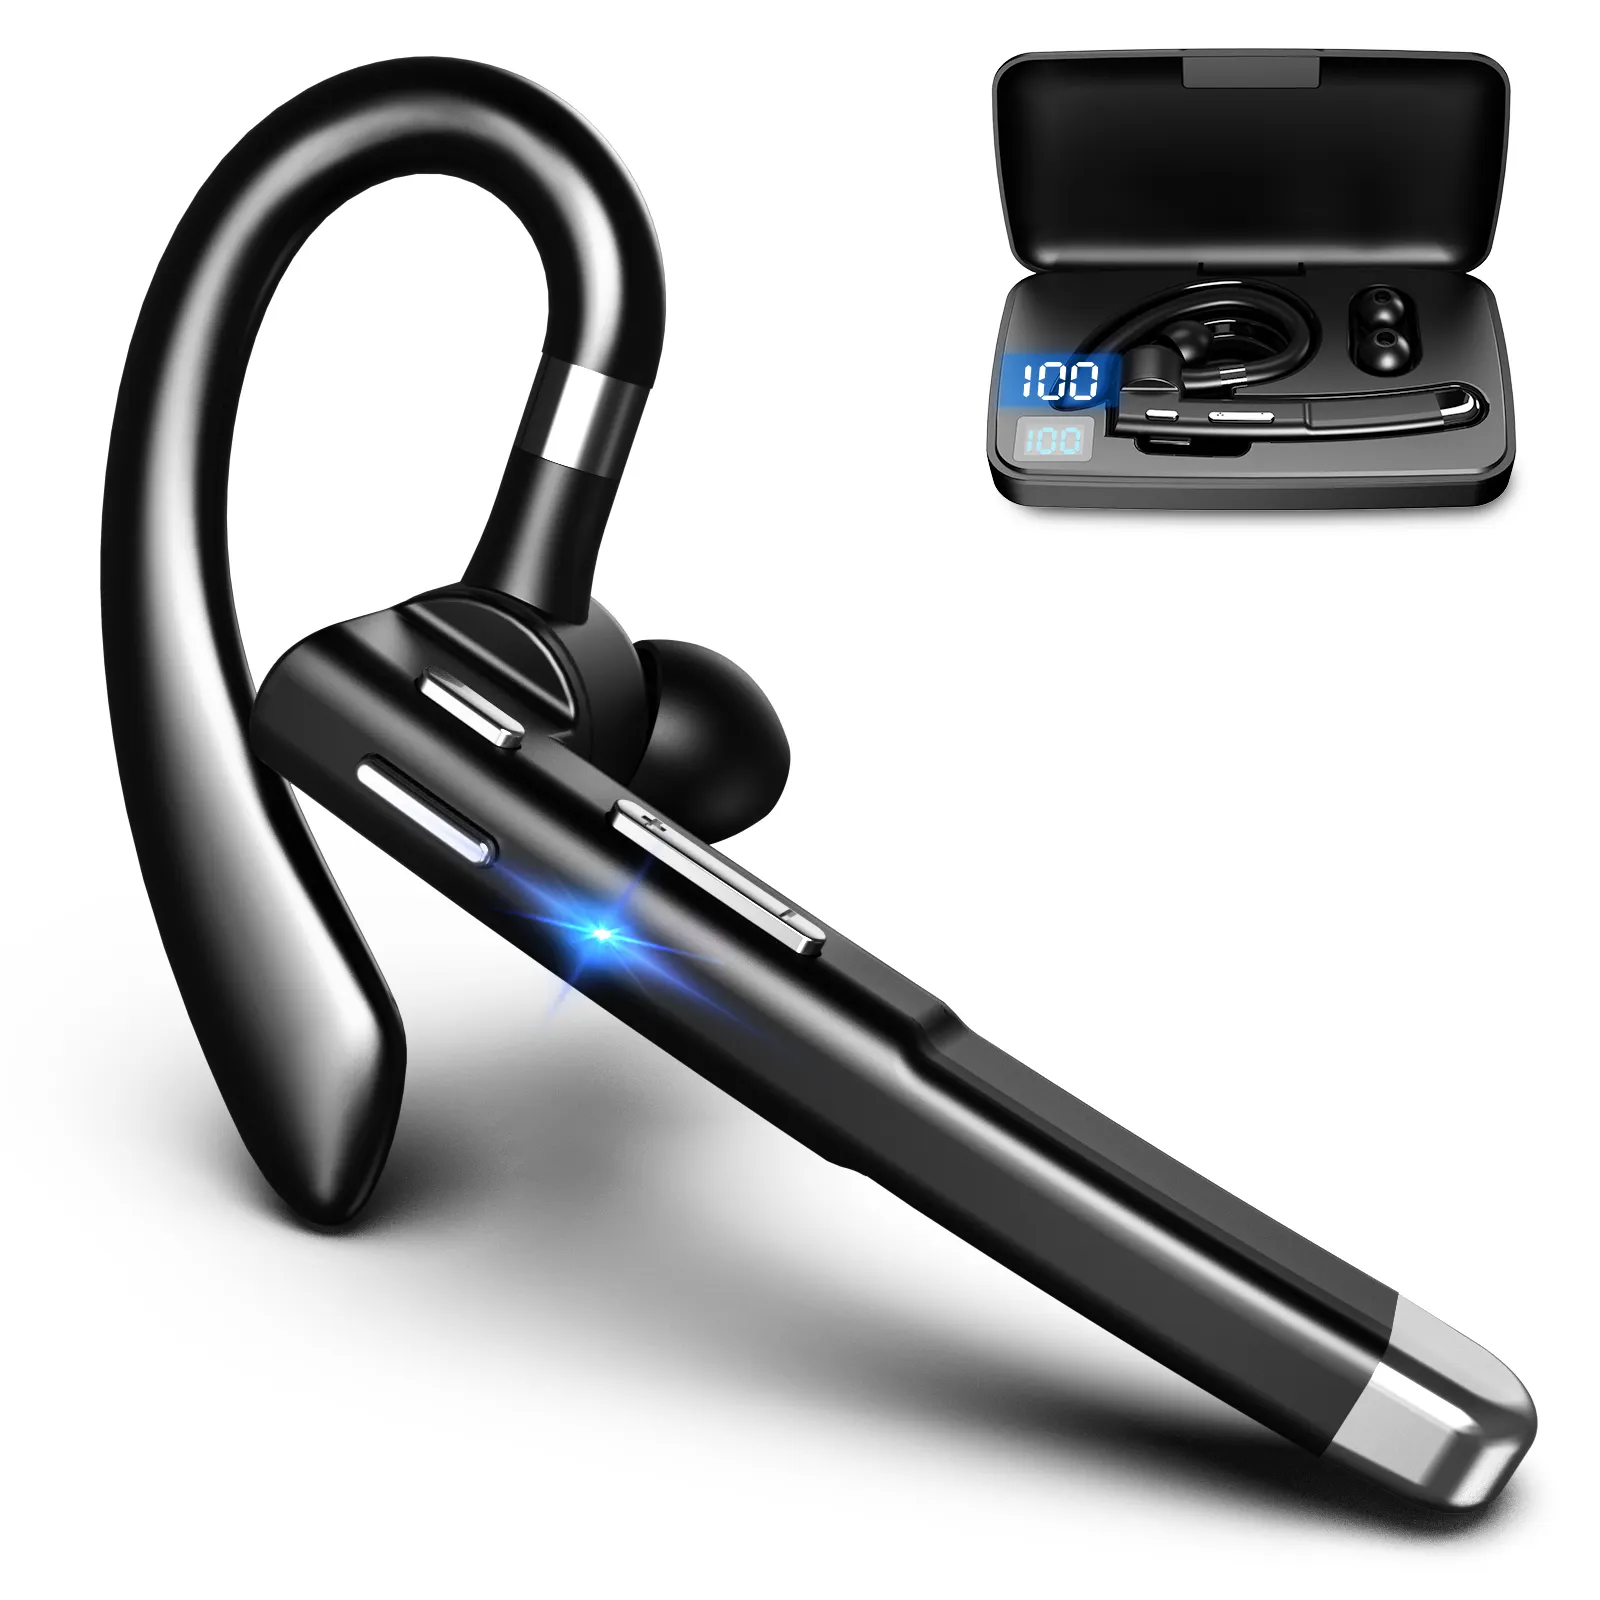 Business Single Wireless Headset, Blue tooth Earpiece Hands-Free Earphones with Built-in Mic for Driving/Business/Office